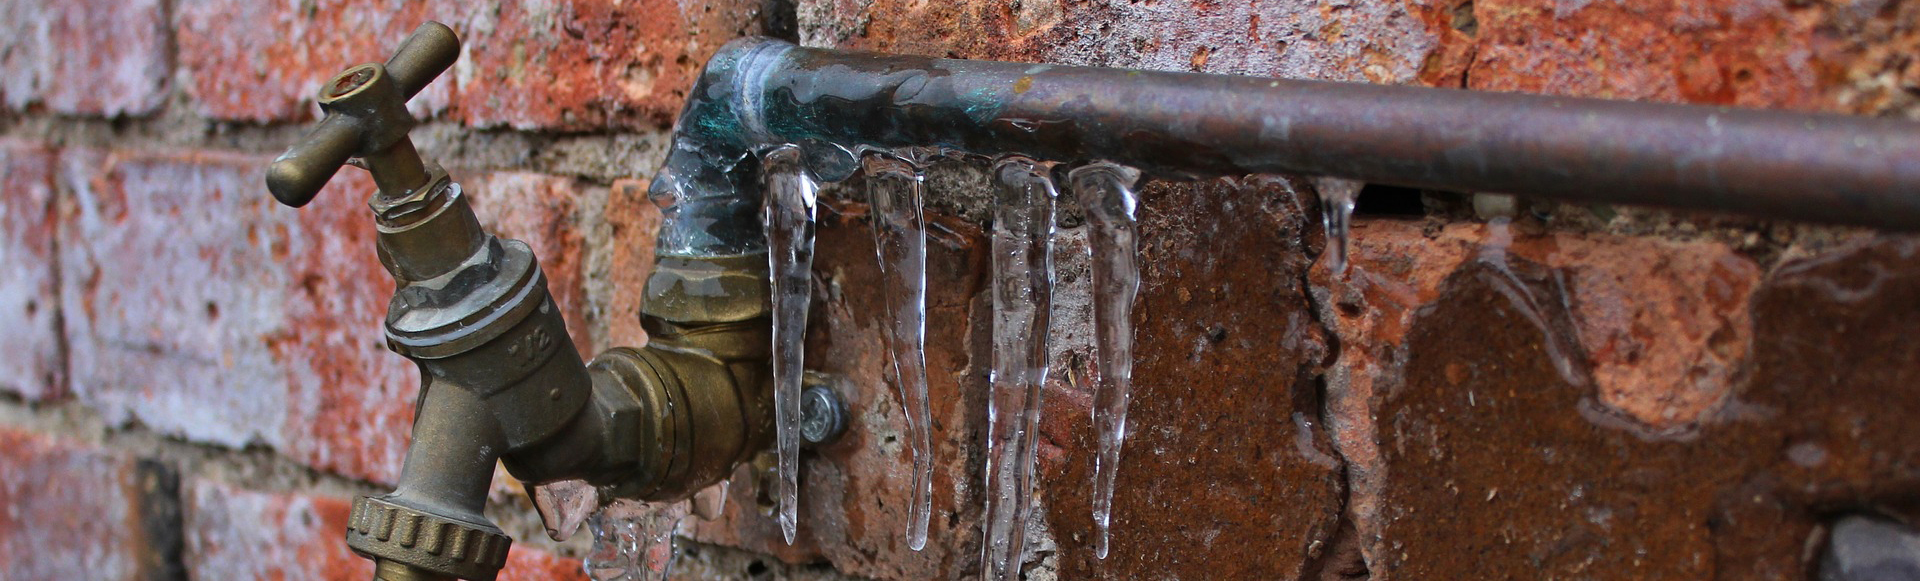 frozen pipes, preventing pipes from freezing